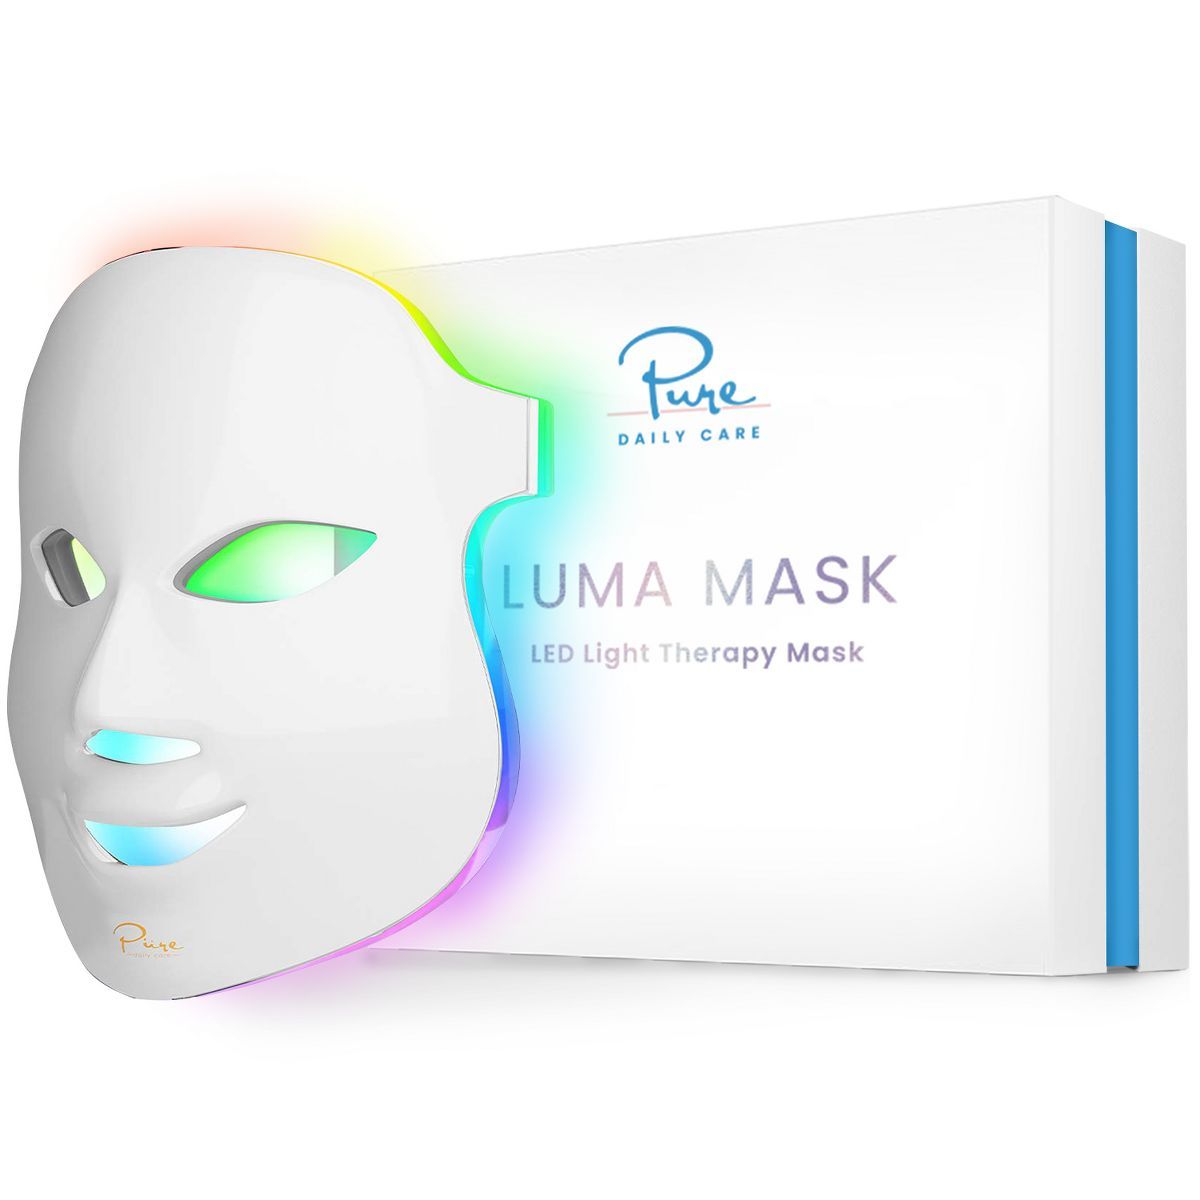 Pure Daily Care - Luma LED Skin Therapy Mask - Home Skin Rejuvenation & Anti-Aging Light Therapy ... | Target